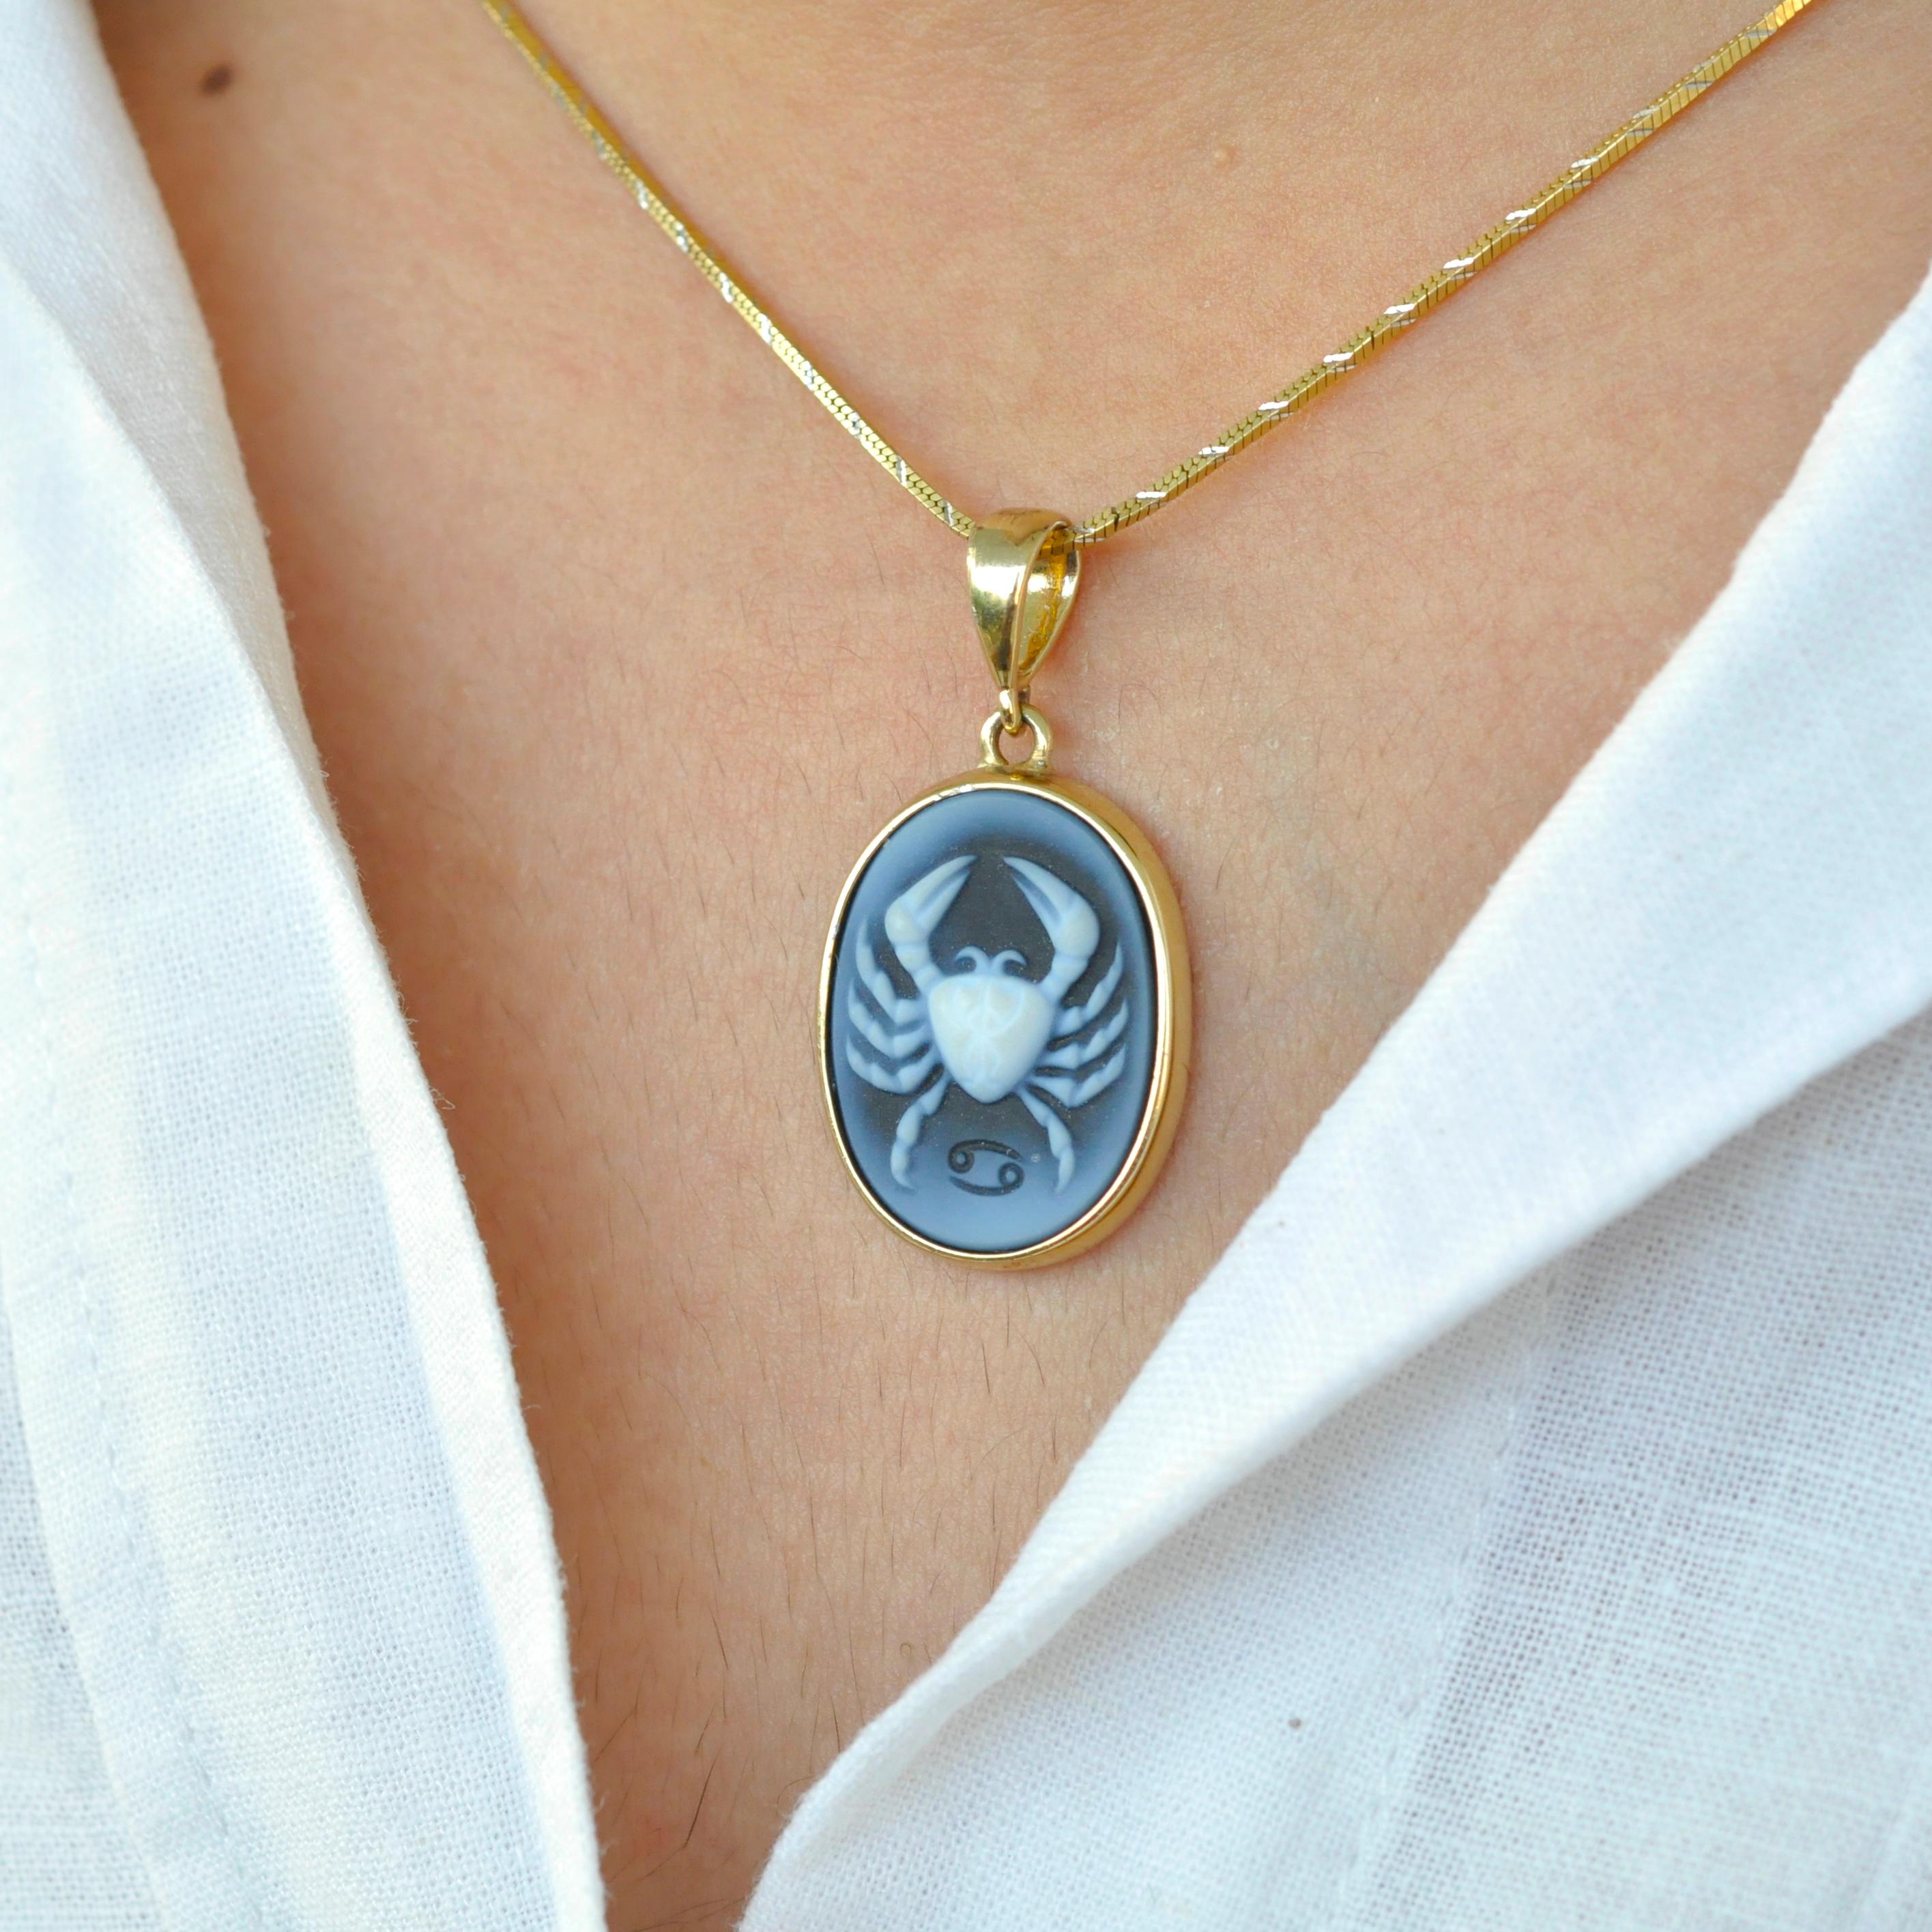 Here's our cancer zodiac carving cameo pendant necklace from the zodiac collection. The cameo is made in Germany by an expert cameo engraver on the relief of 100% natural agate rock from Brazil (a variety of chalcedony). The pendant is set in our